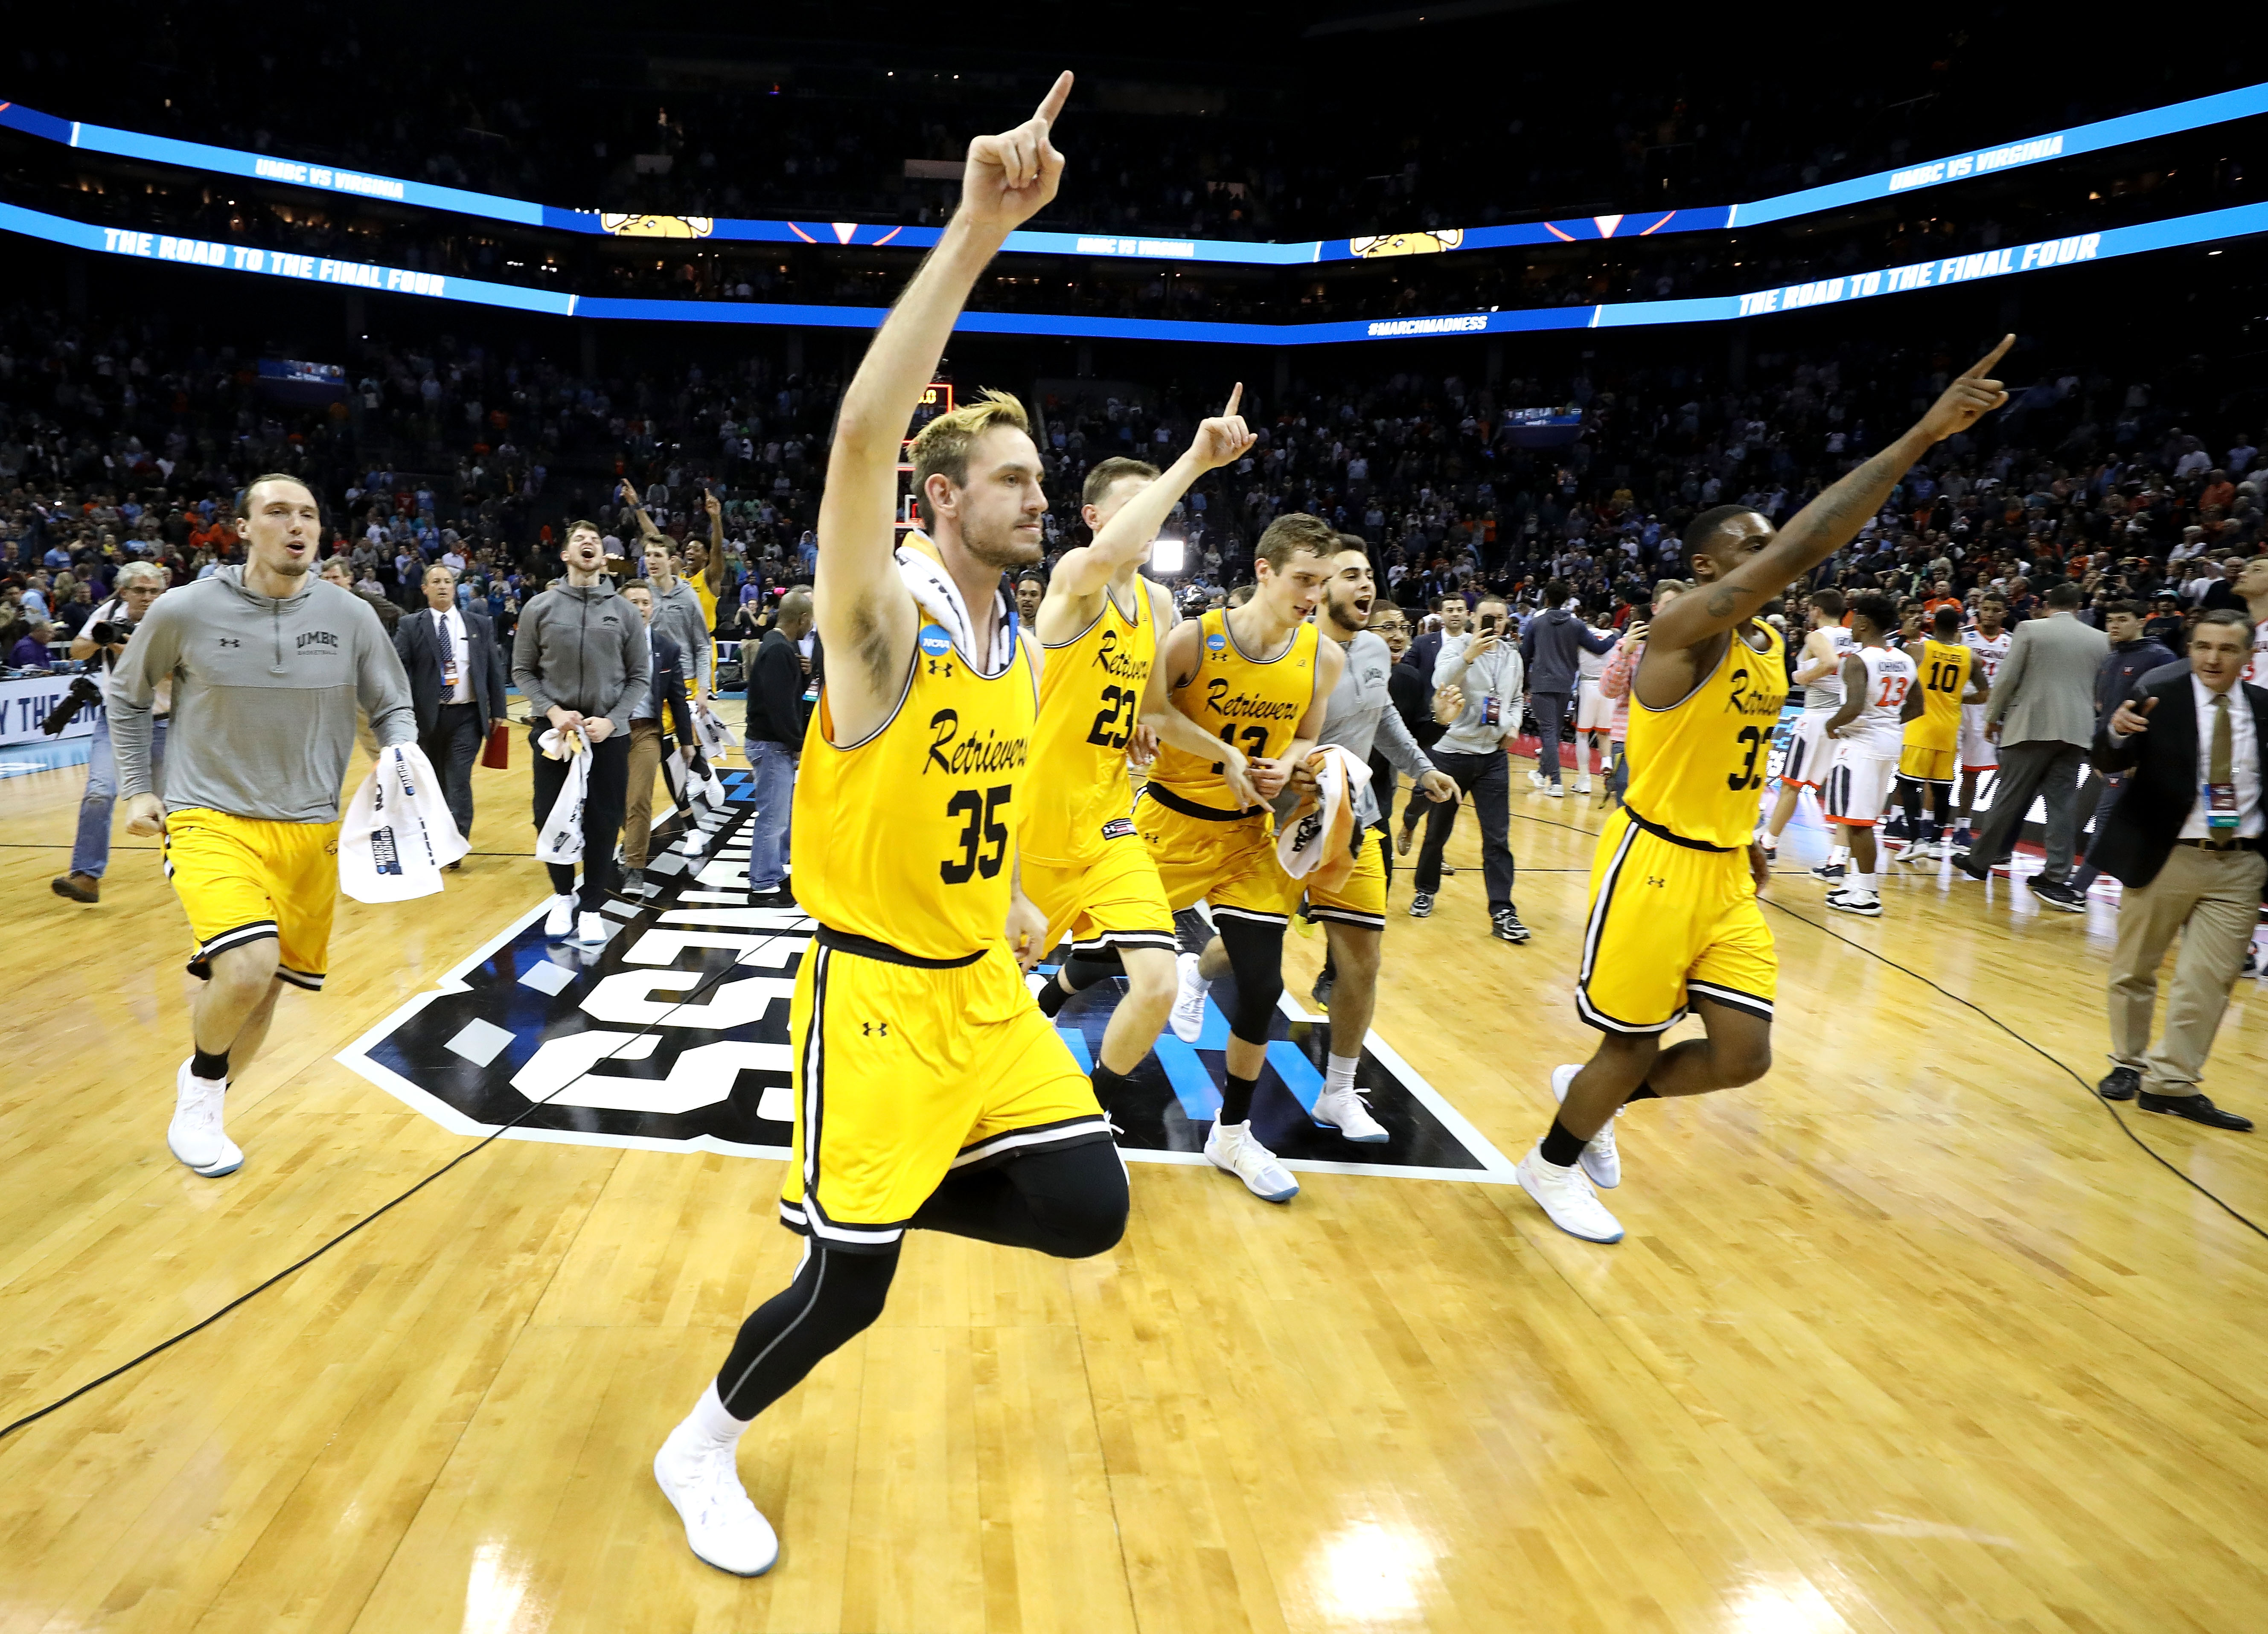 Umbc Shocked Virginia And Made The Biggest Upset In College